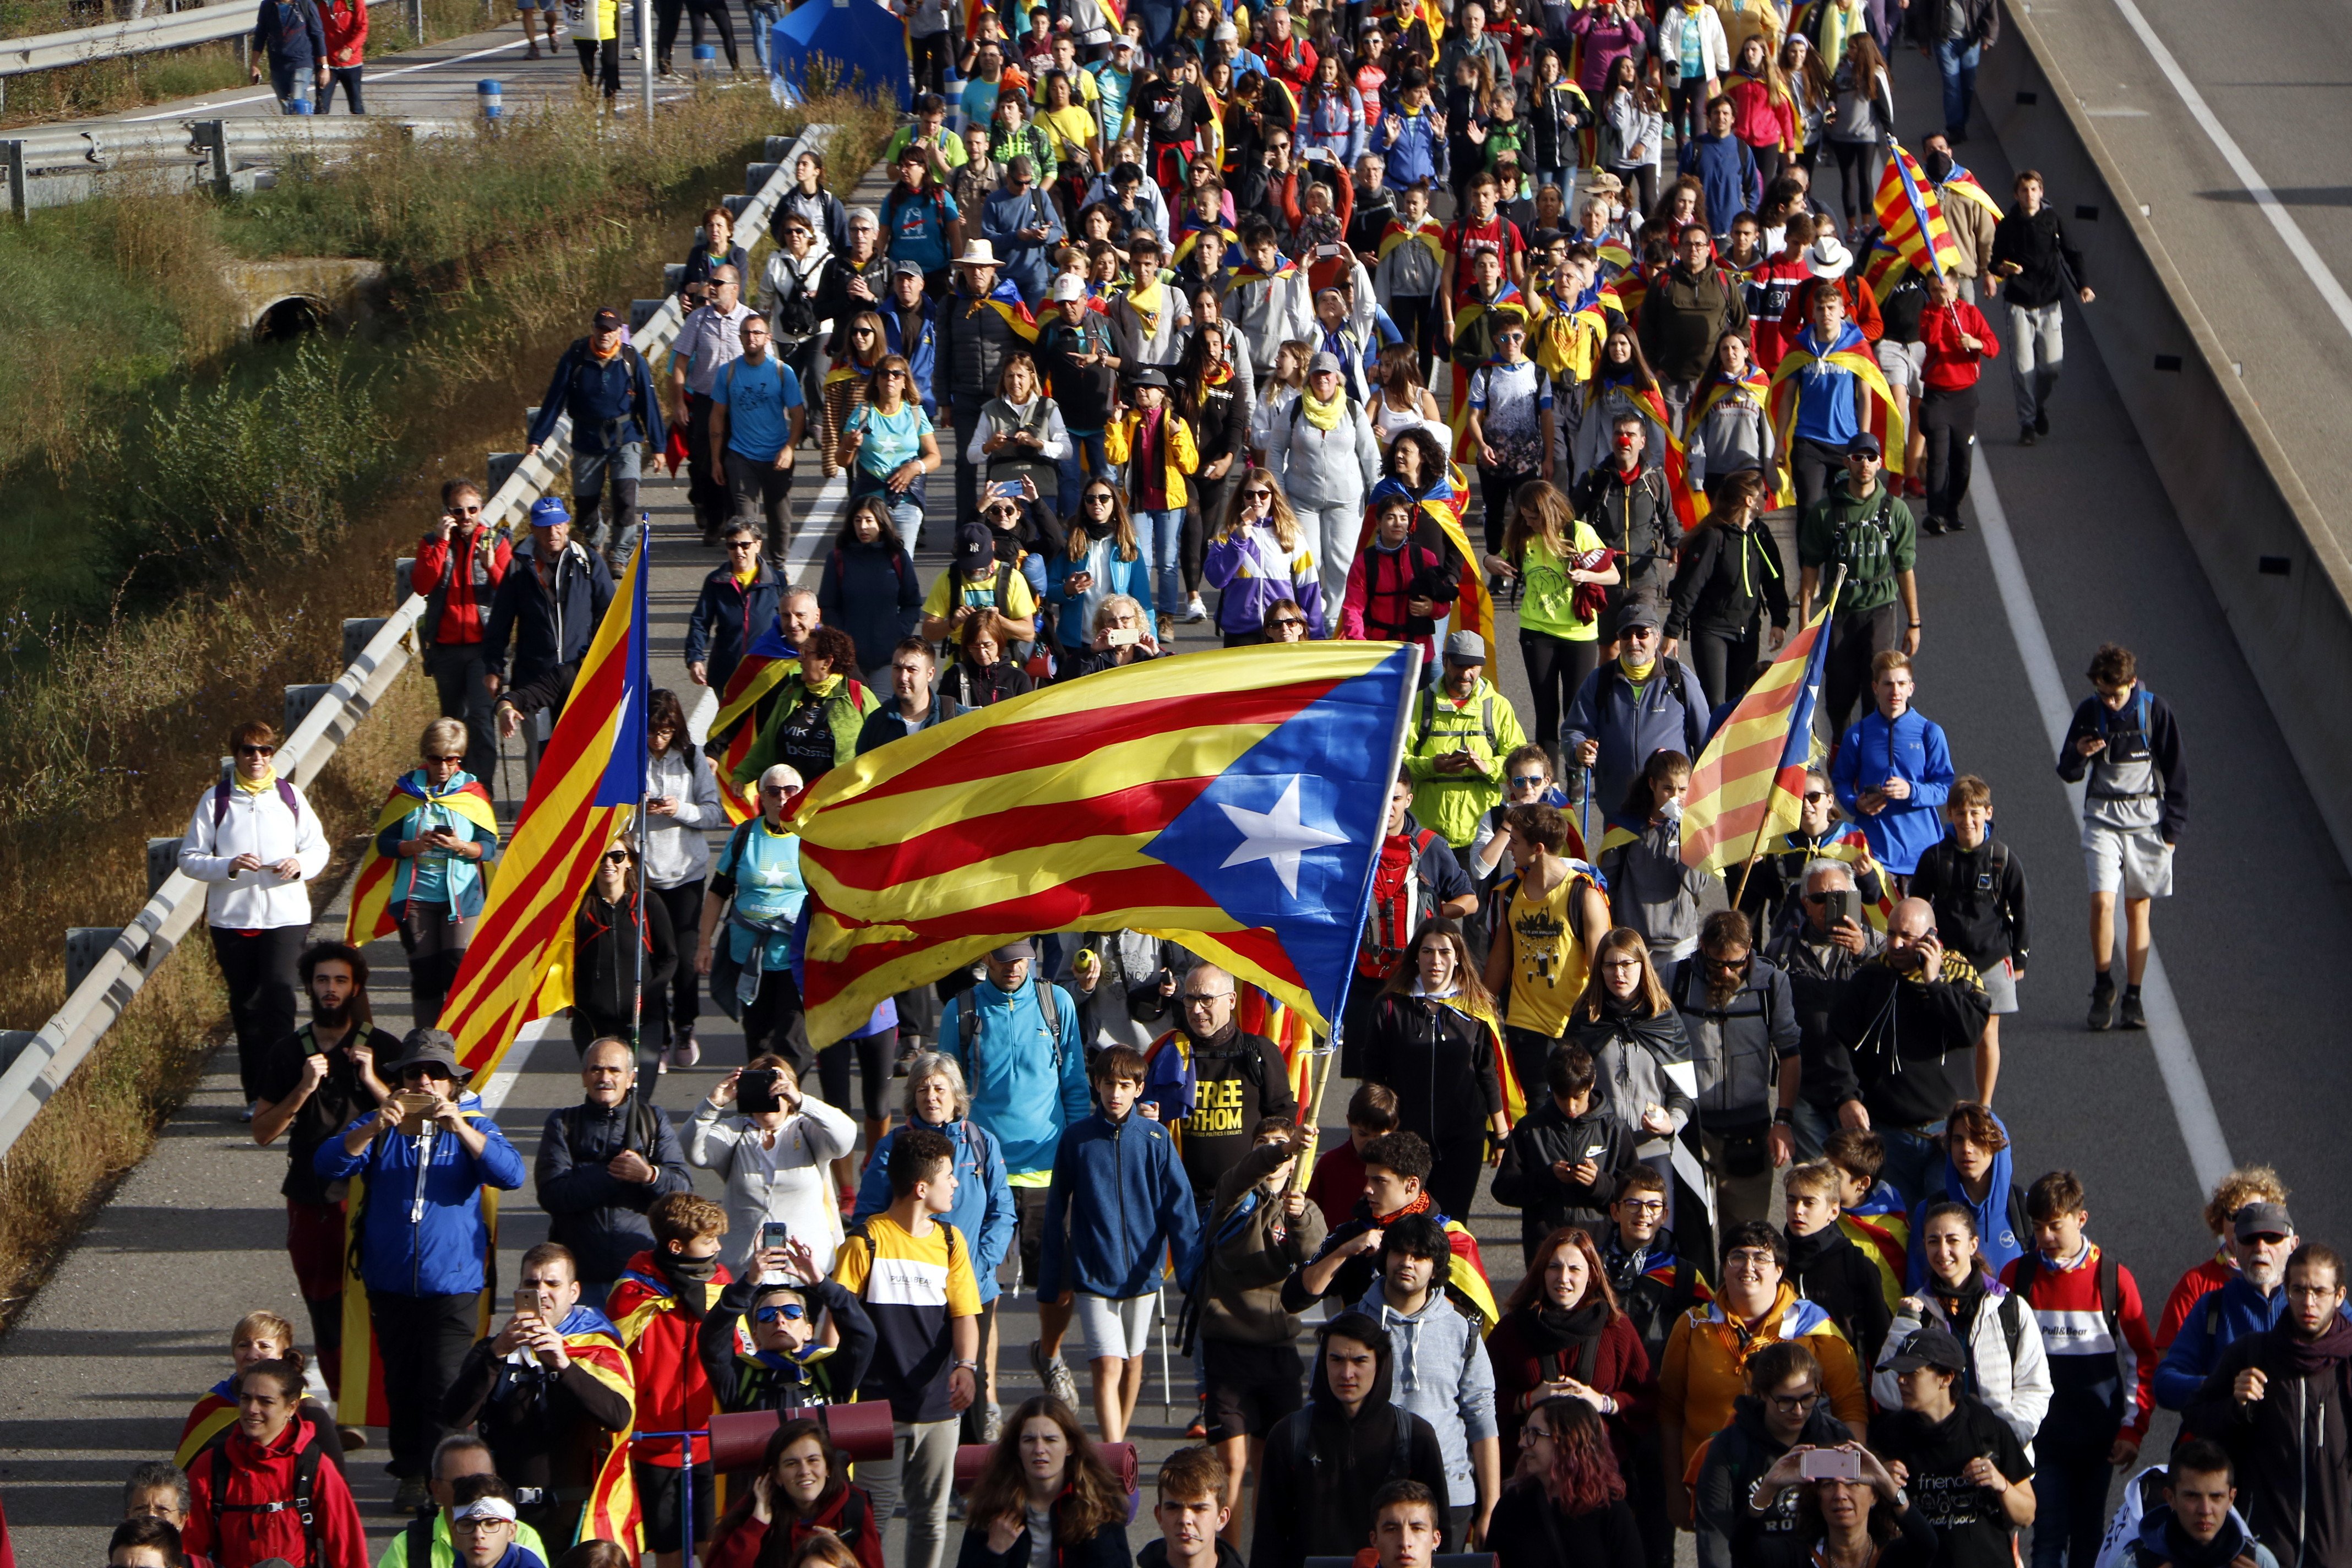 Thousands of Catalans begin three-day "Marches for Freedom" converging on Barcelona